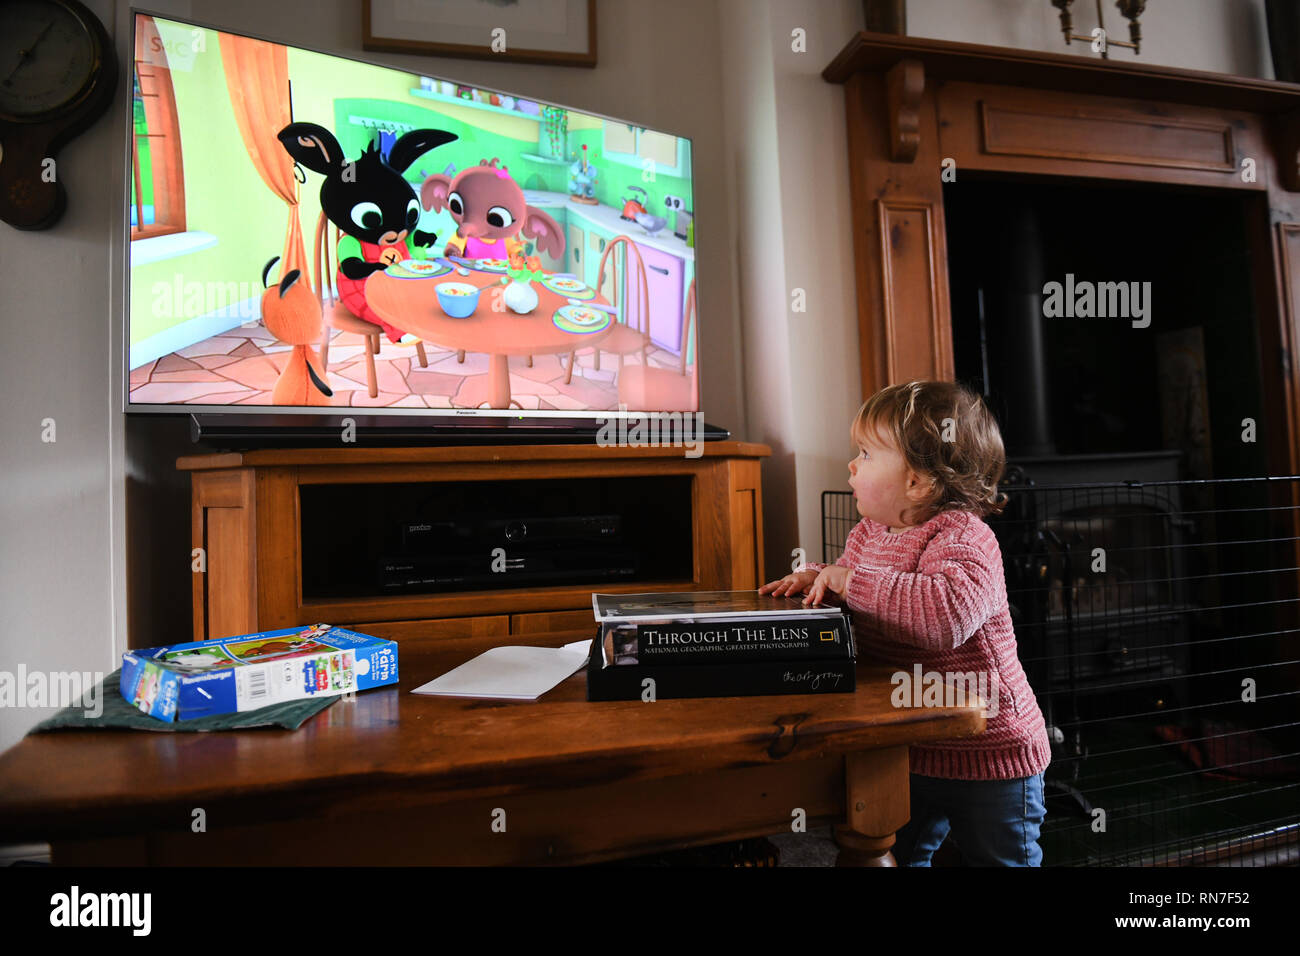 Child watching childrens TV television programme Stock Photo